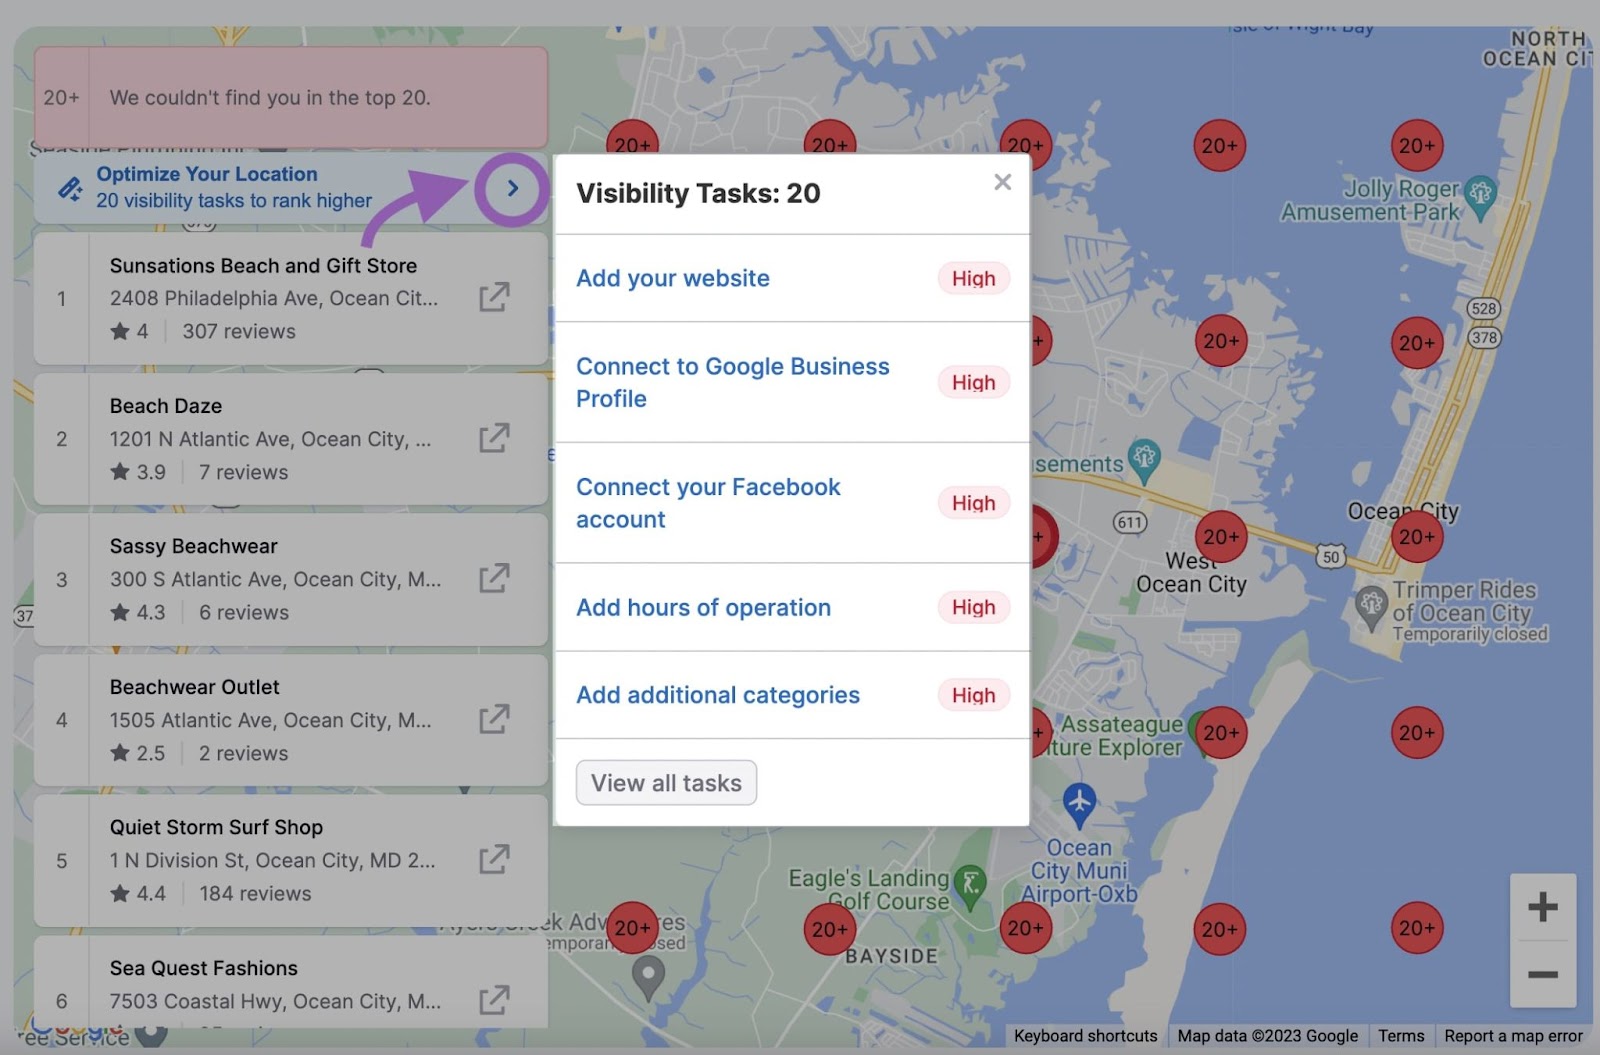 A pop-up window showing visibility tasks for a selected business location